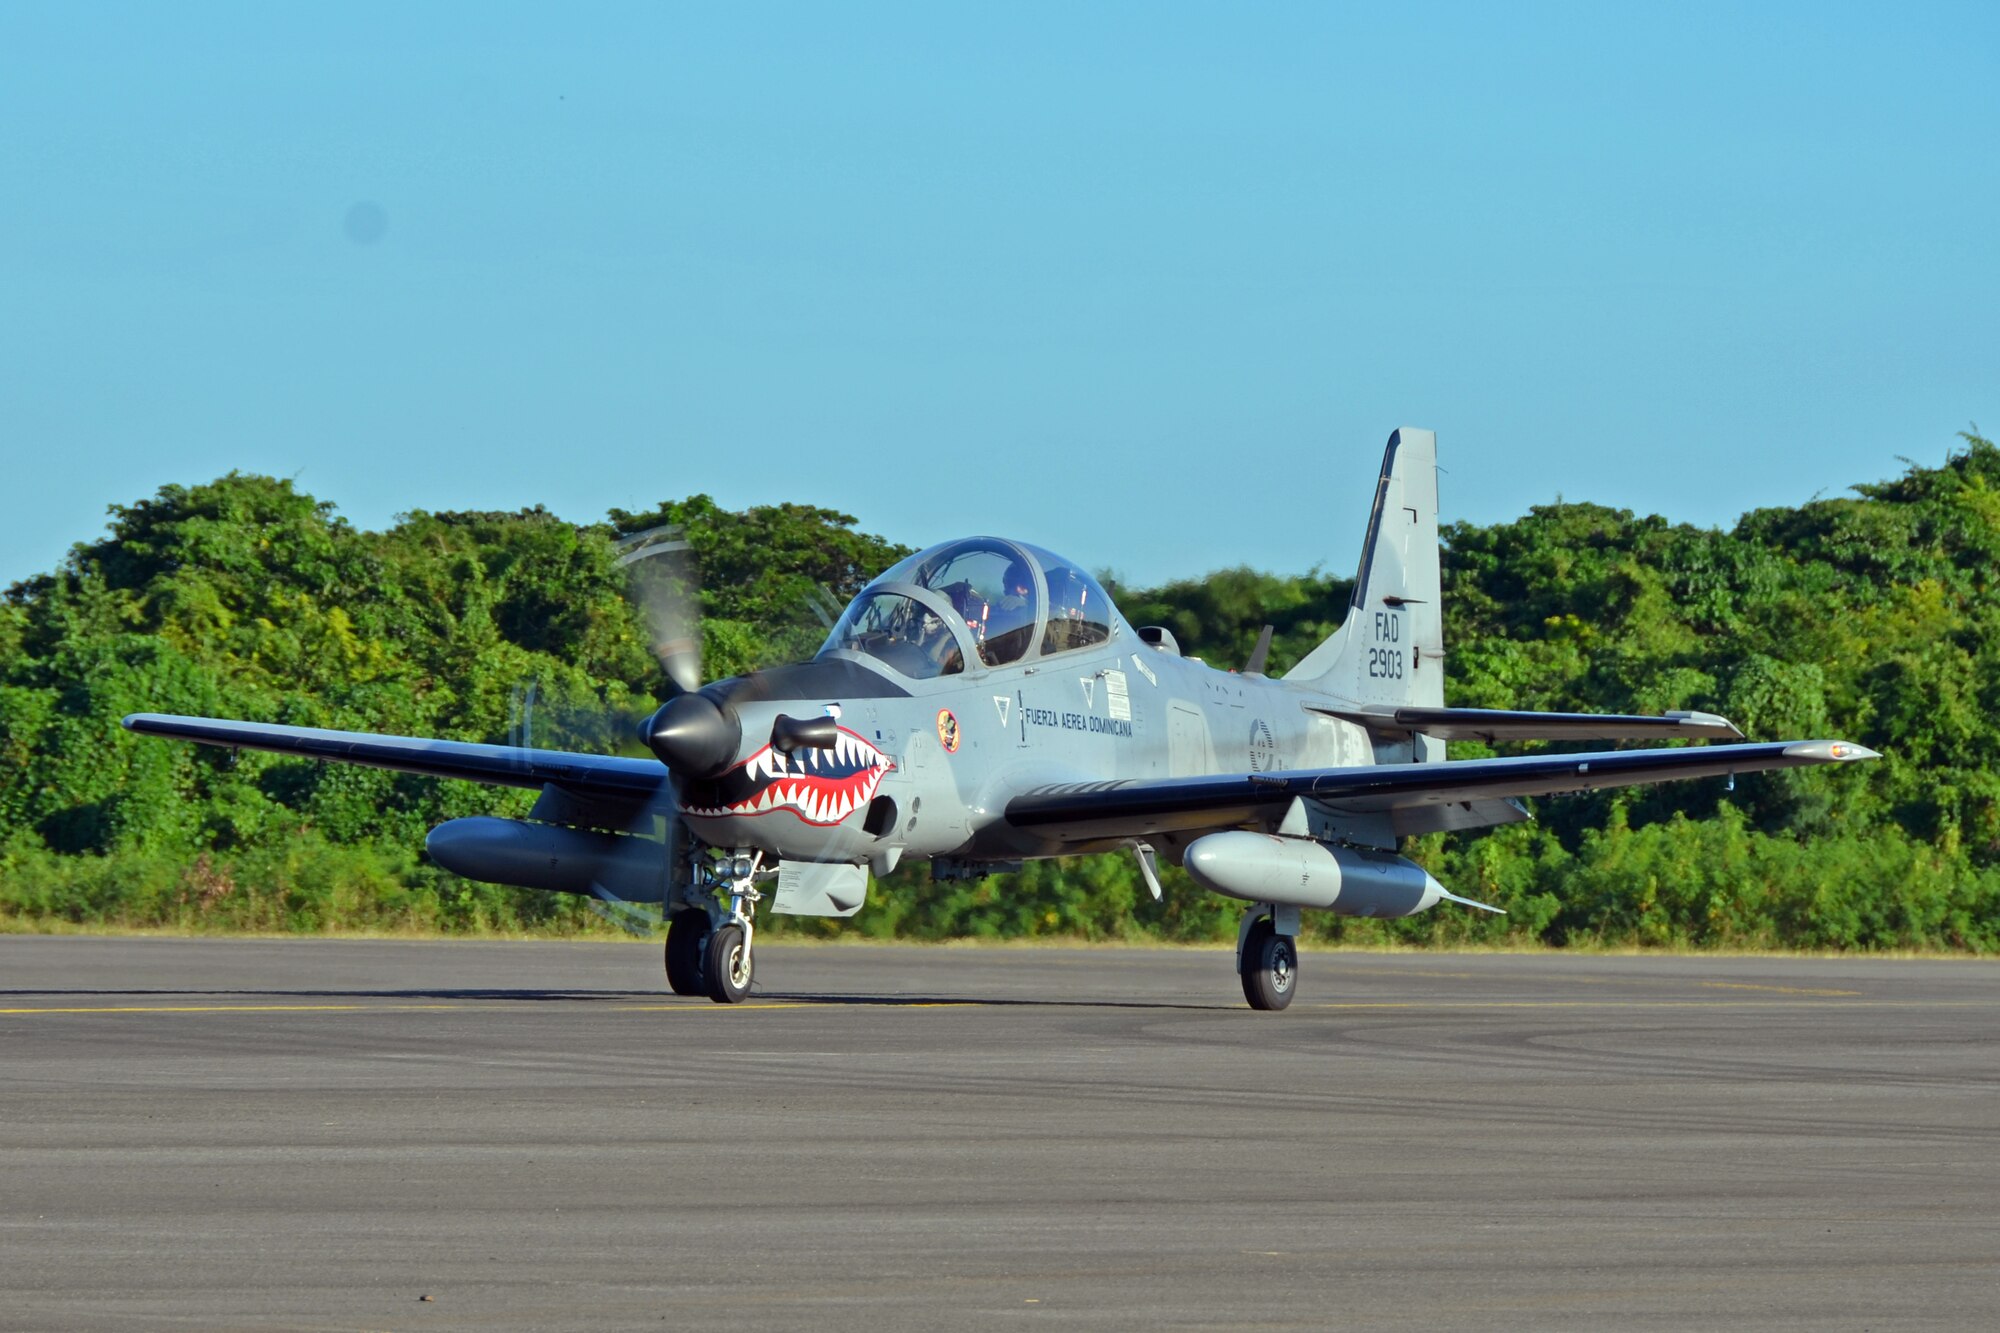 A Dominican Republic air force A-29 Super Tucano pilot taxis after a mission as part of an exercise to combat illegal drug trafficking Dec. 3, 2013, over the skies of the Caribbean. The exercise is part of the Sovereign Skies Program, an initiative between the U.S., Colombian, and Dominican Republic air forces to share best-practices on procedures to detect, track and intercept illegal drugs moving north from South America. (U.S. Air Force photo by Capt. Justin Brockhoff/Released)











